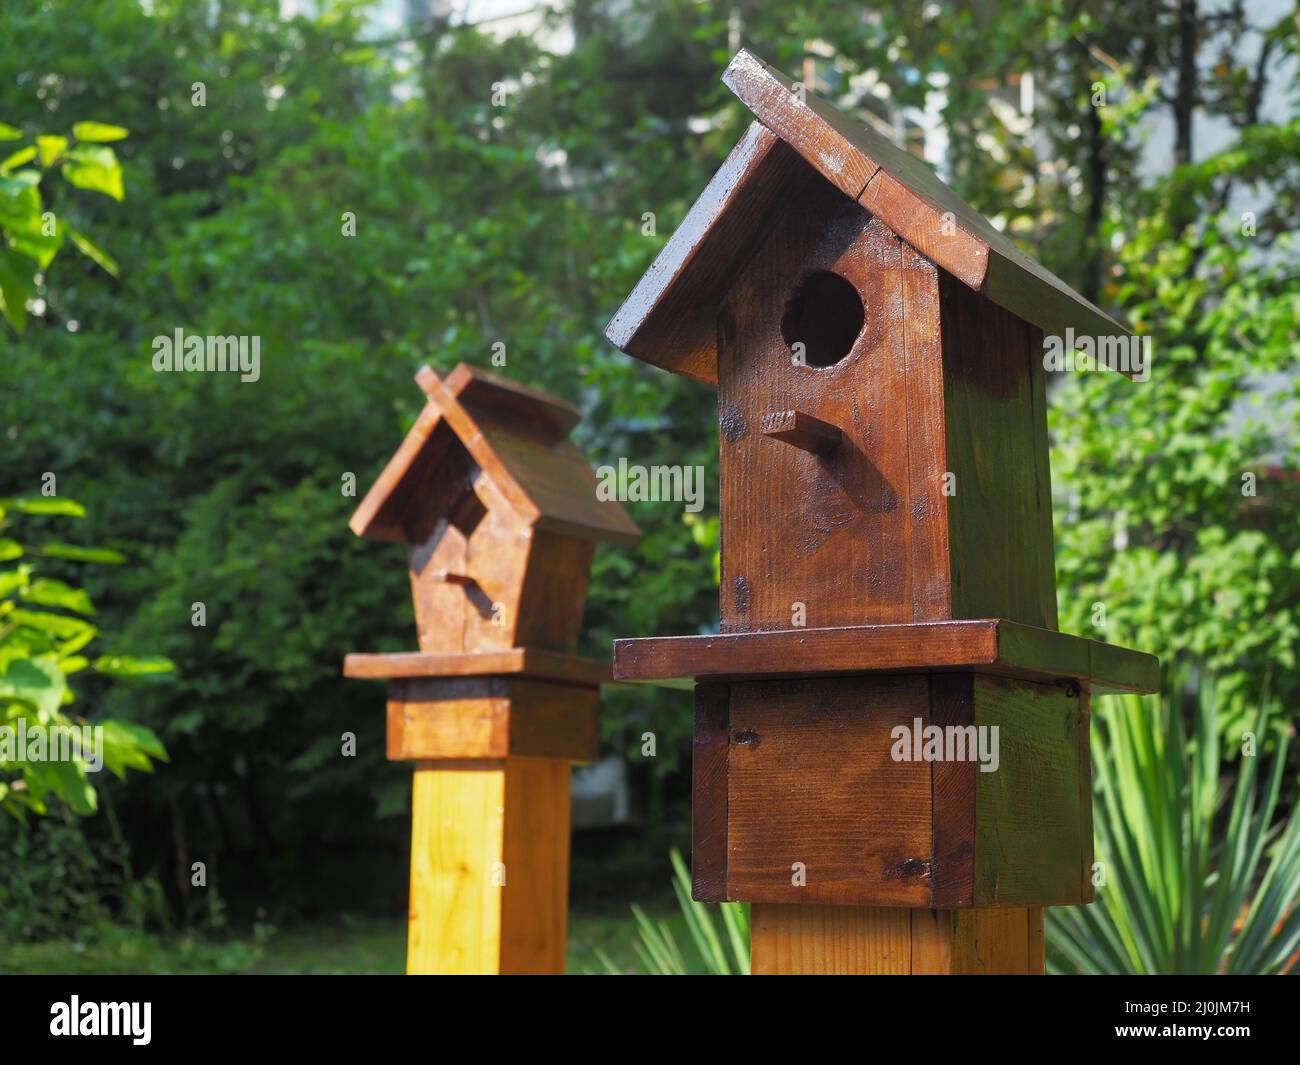 Two decorative wooden birdhouses on the background of park green plants. Closeup photo Stock Photo